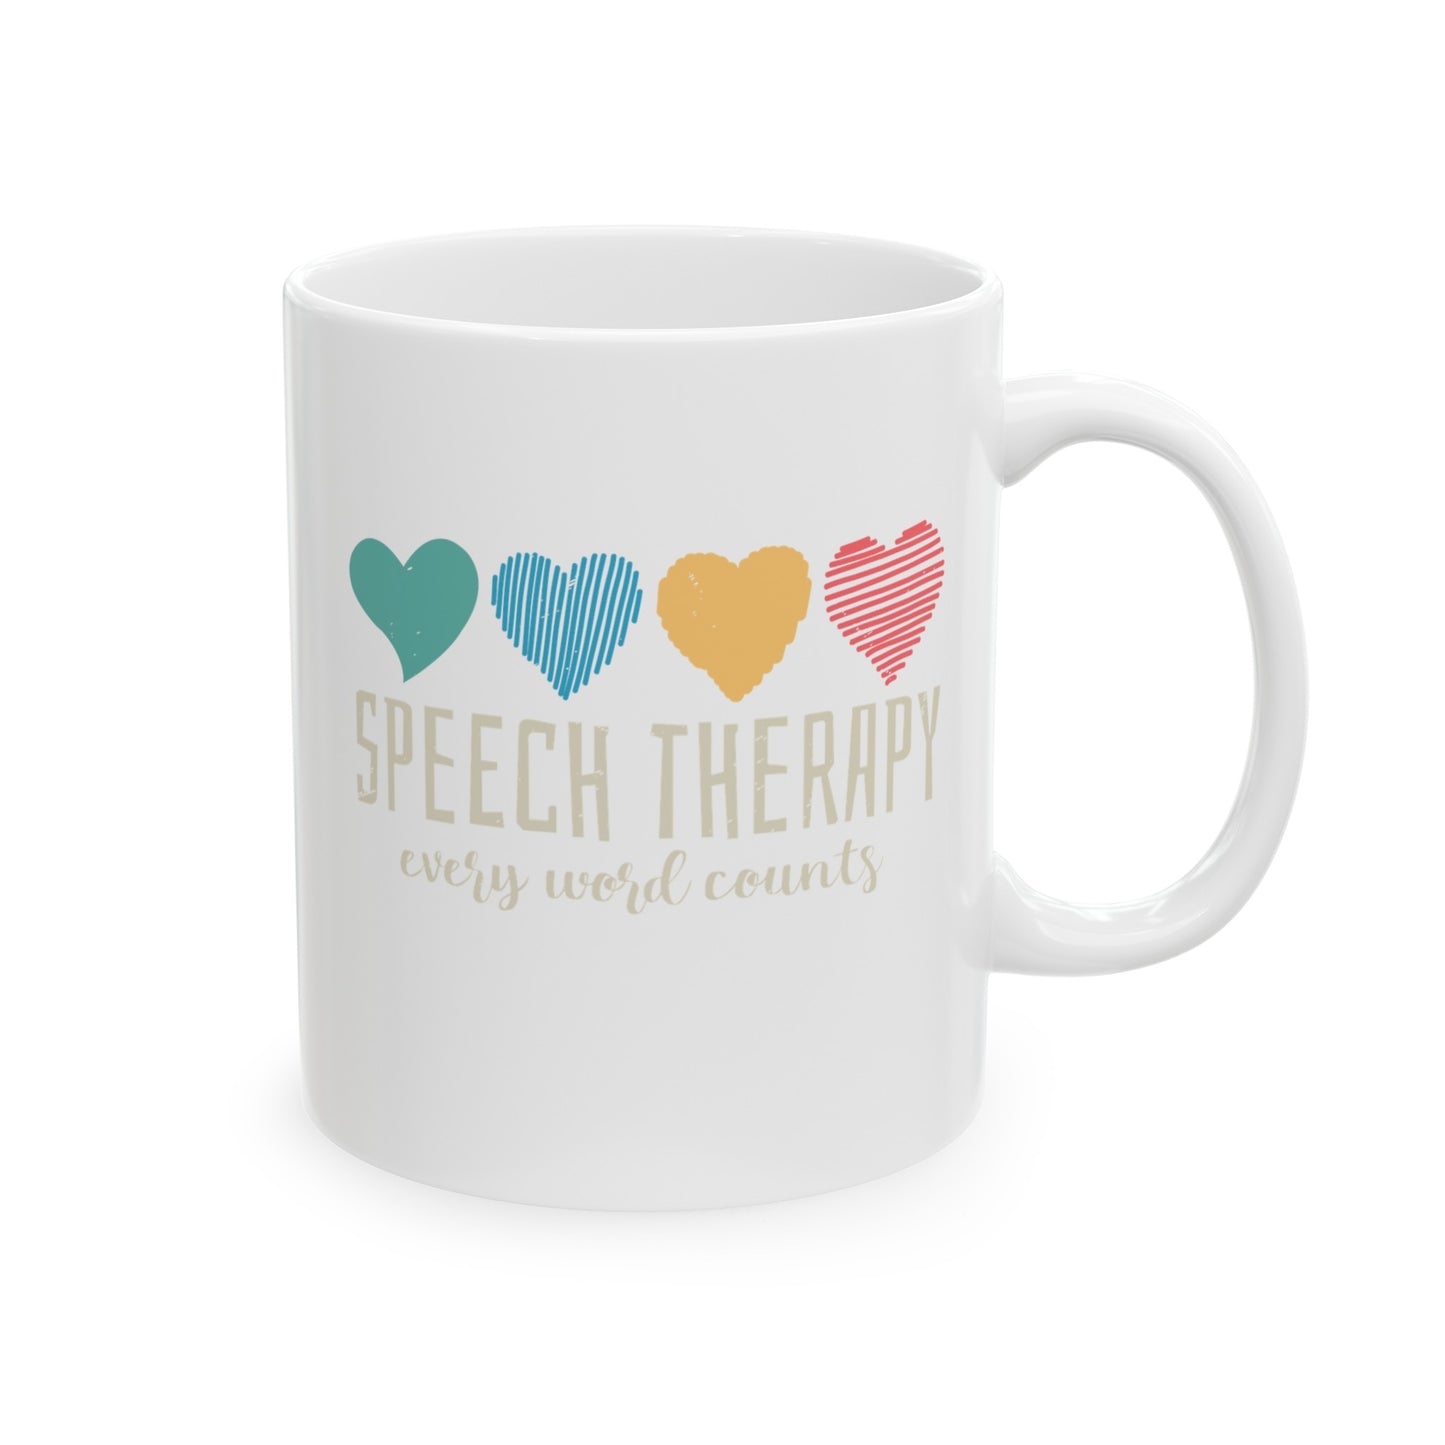 Speech Therapy Every Words Count Mugs, Speech Pathologist Mugs, SLP Mugs, Therapist Mugs, Therapy Mugs